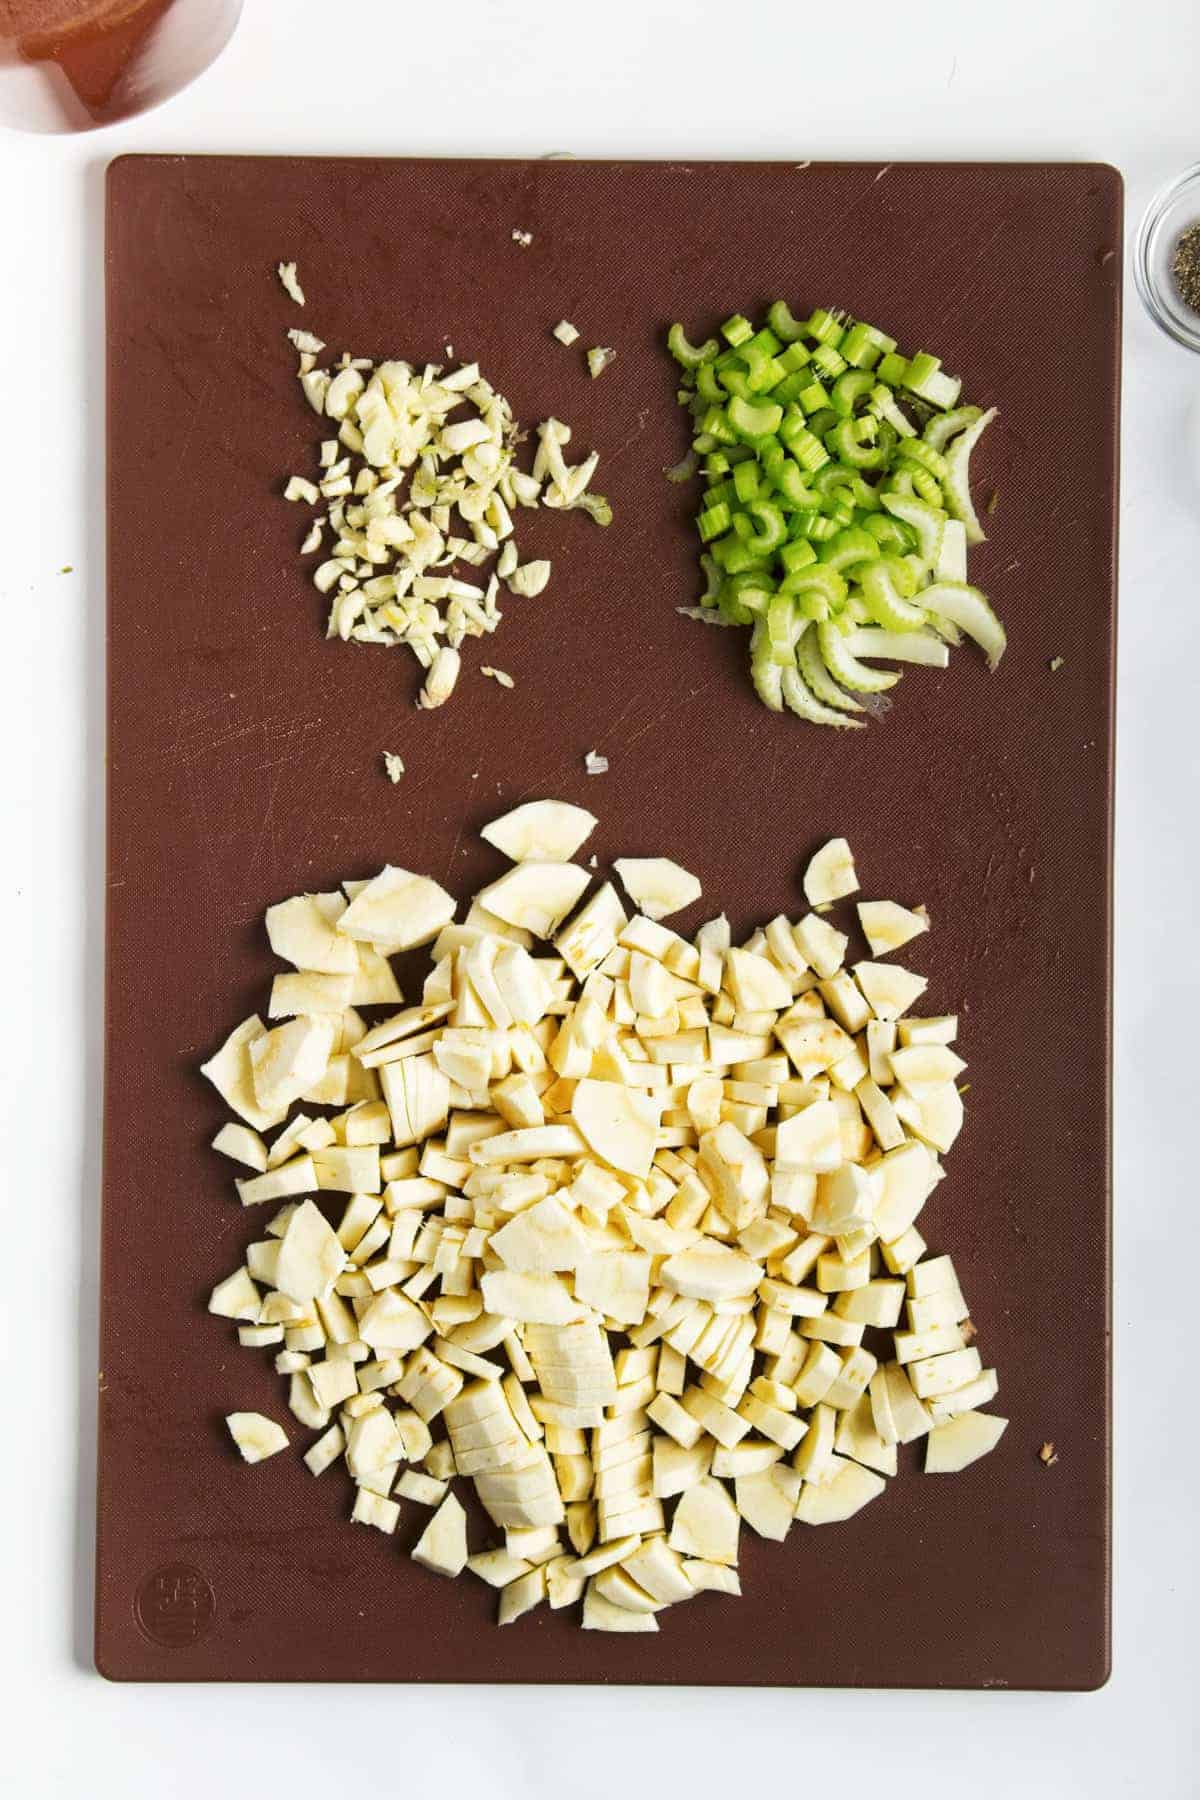 Parsnips, garlic, and celery chopped on cutting board.